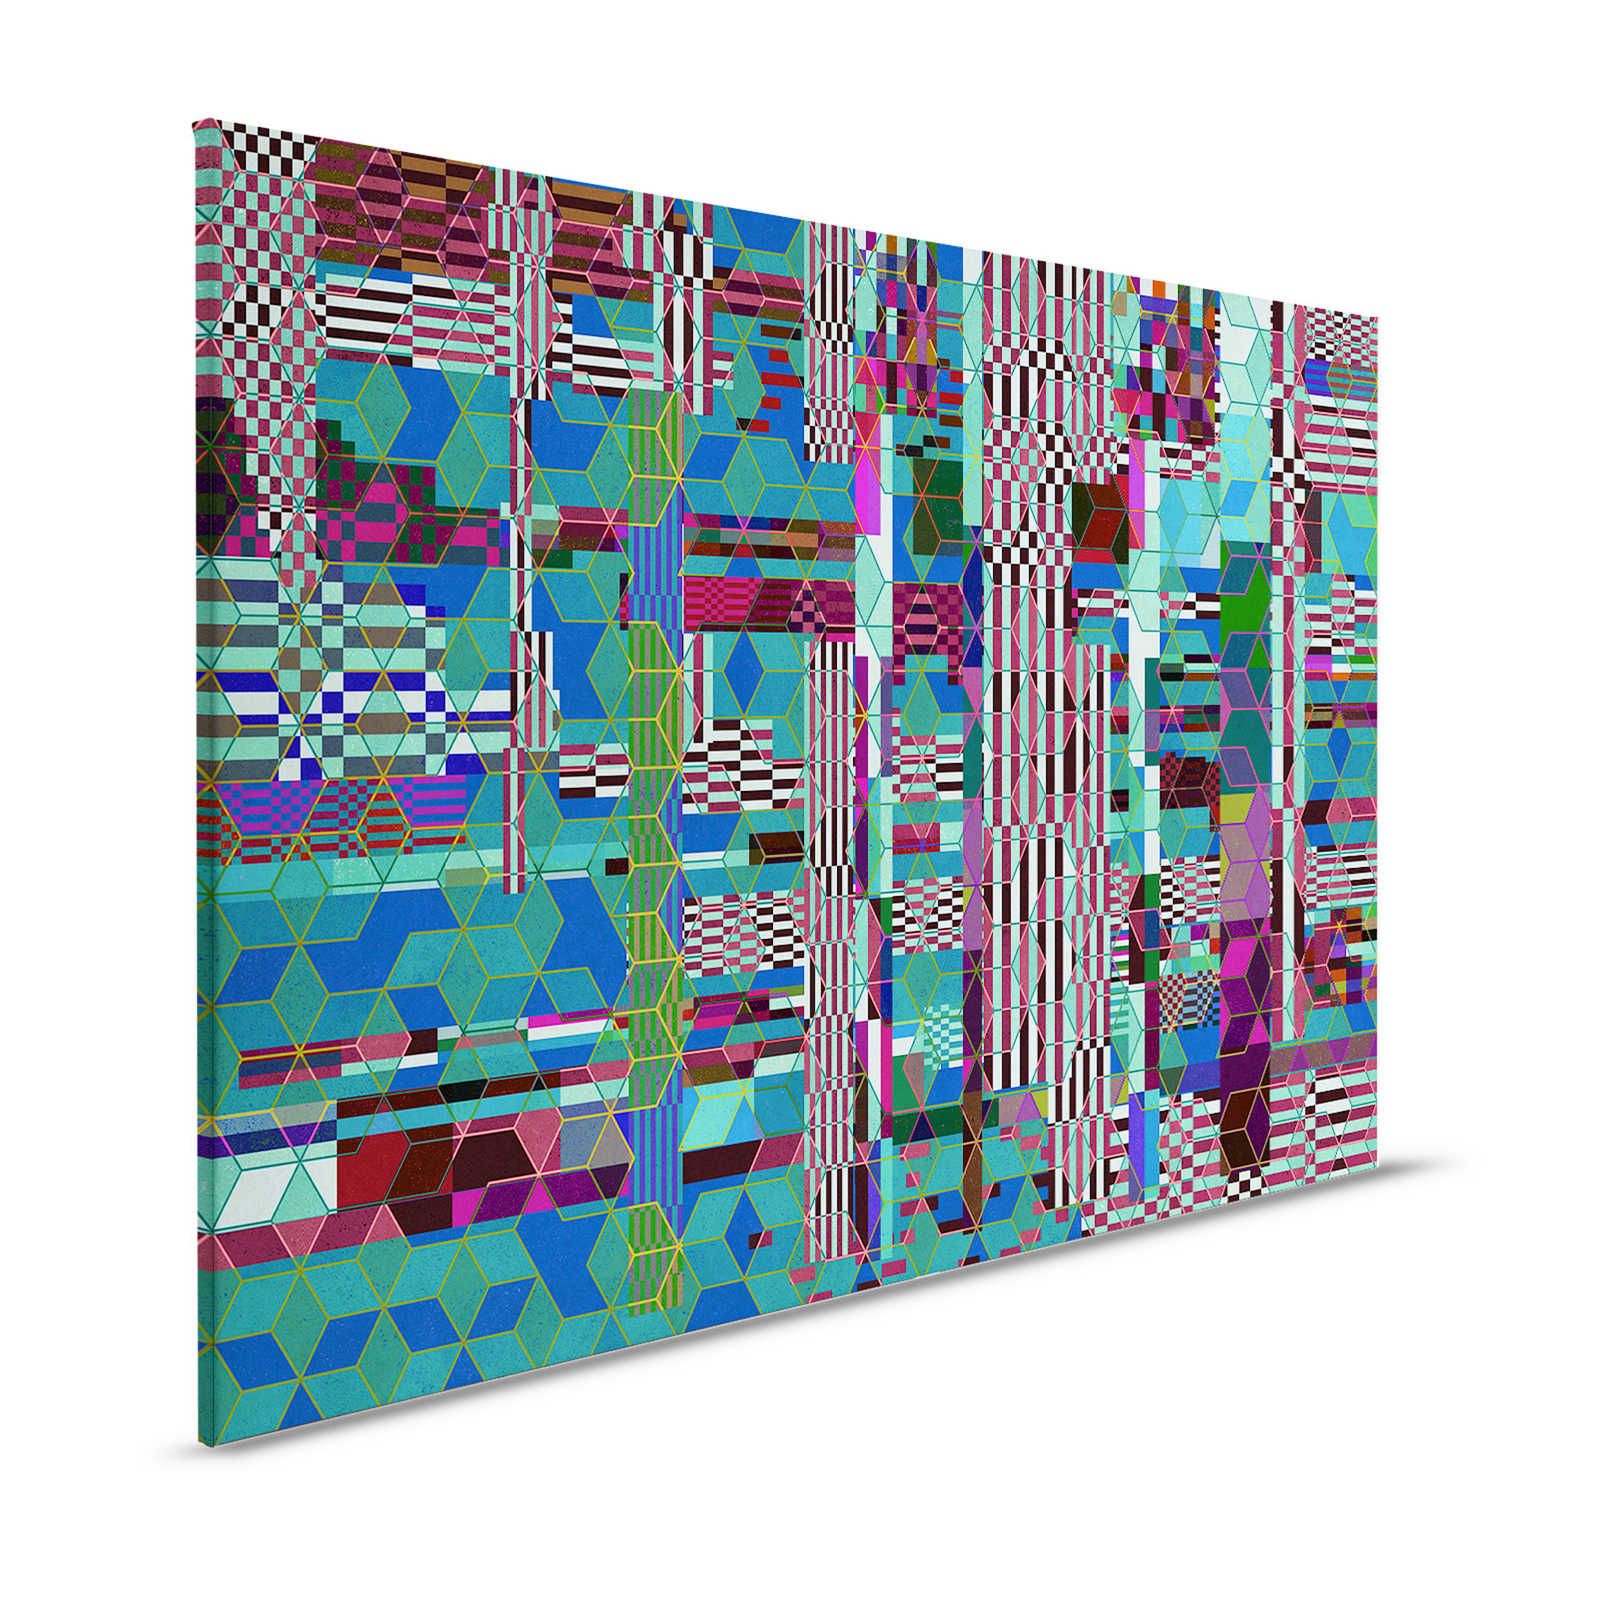 Mirage 3 - Design Canvas Painting Pattern Collage Blue & Green - 1.20 m x 0.80 m
